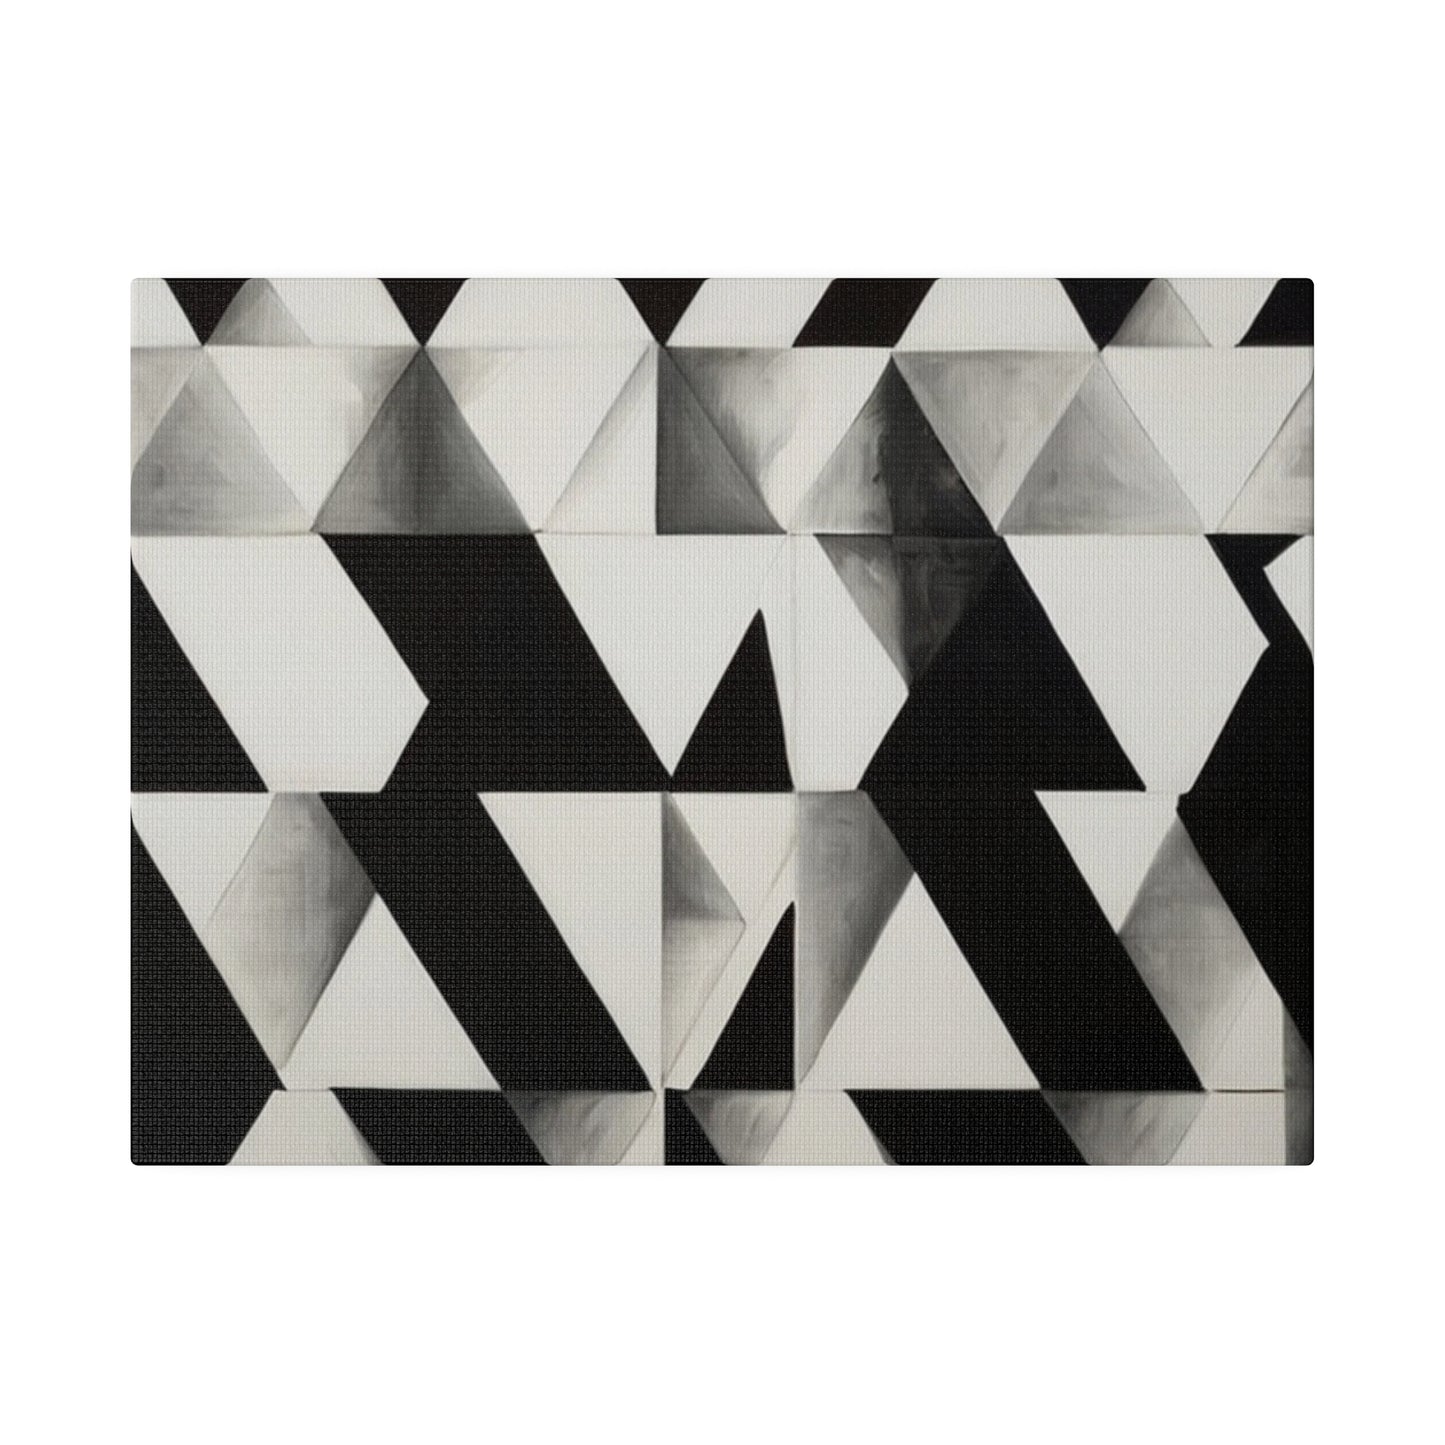 Black and White Patterns - Matte Canvas, Stretched, 0.75"